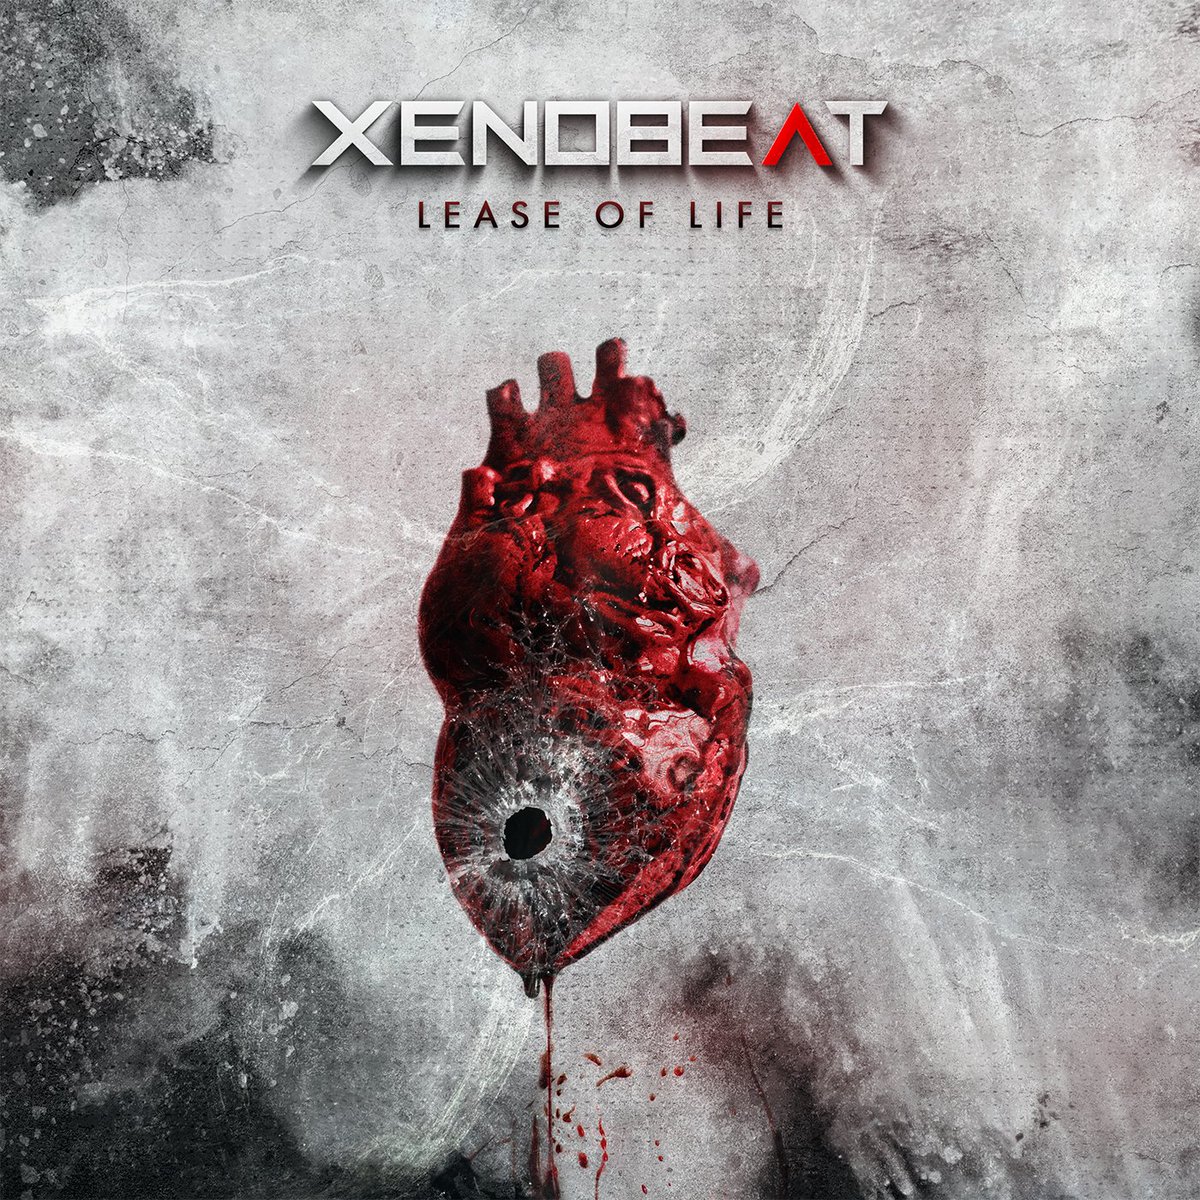 Something new is coming soon. Release date a and tracklisting TBA. Cover art by @Dark_Motions #xenobeat #aggrotech #ebm #industrial